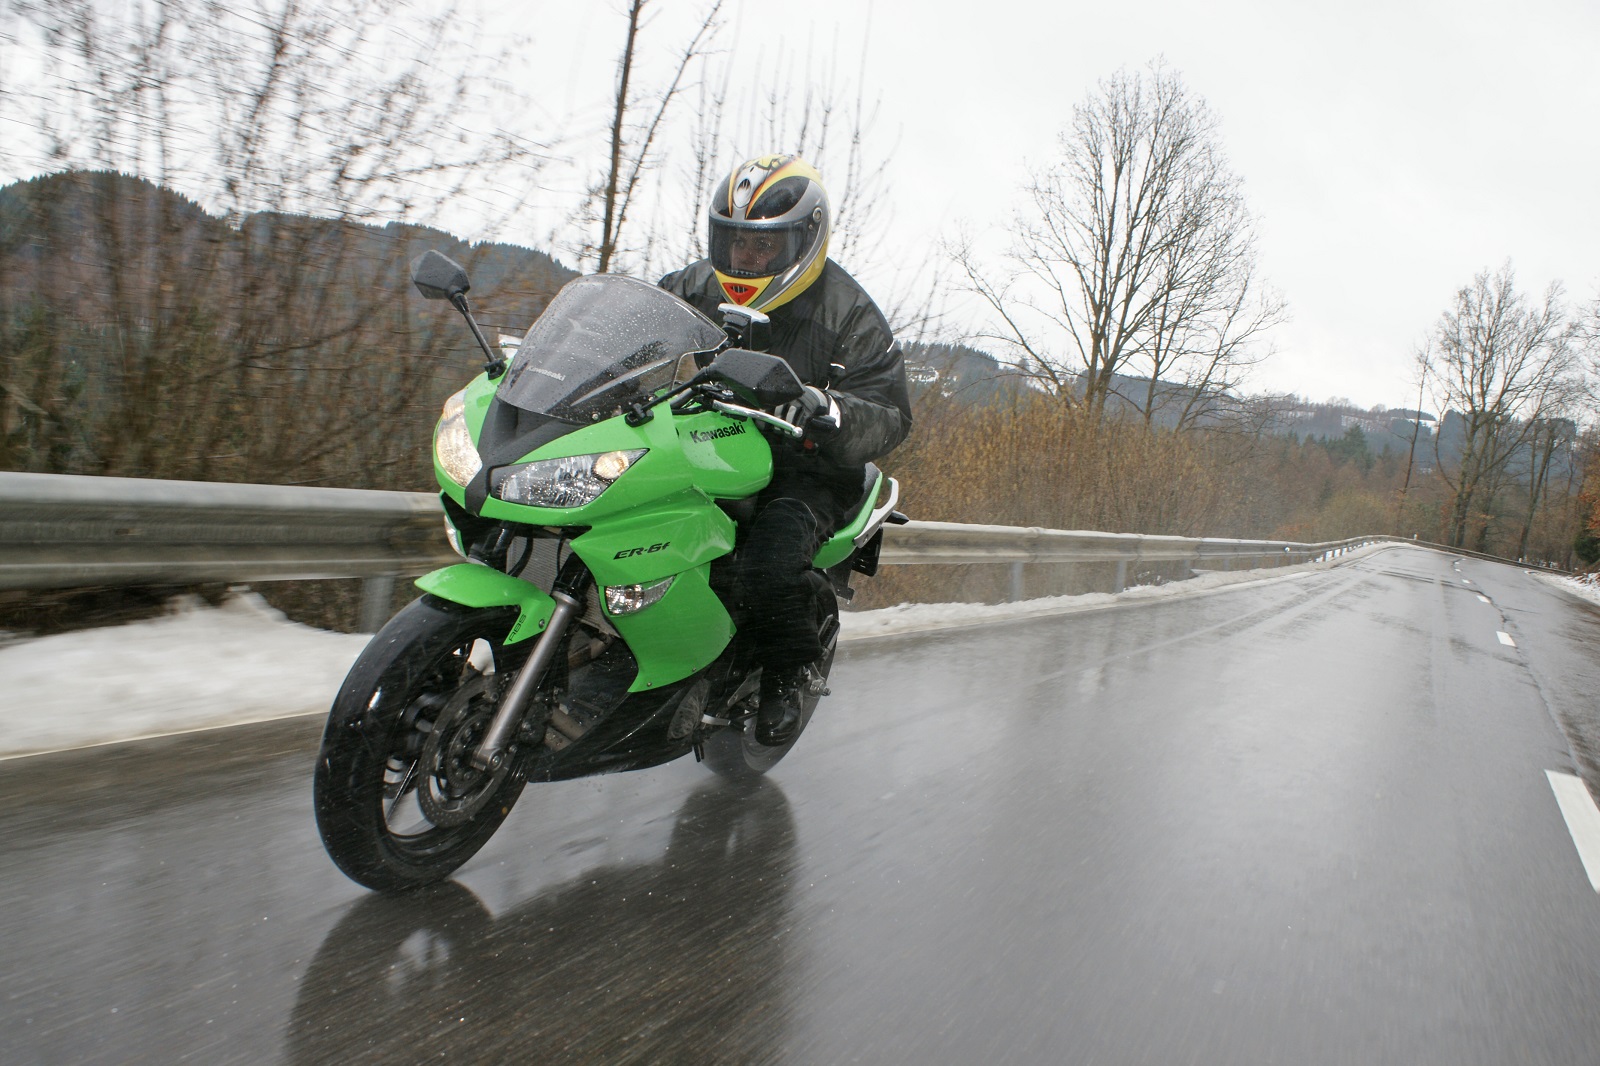 <p class="wp-caption-text">Image Credit: Shutterstock / Erik Tanghe</p>  <p><span>Rain gear keeps you dry and comfortable during wet rides. A waterproof jacket and pants are essential for maintaining visibility and comfort in the rain.</span></p>